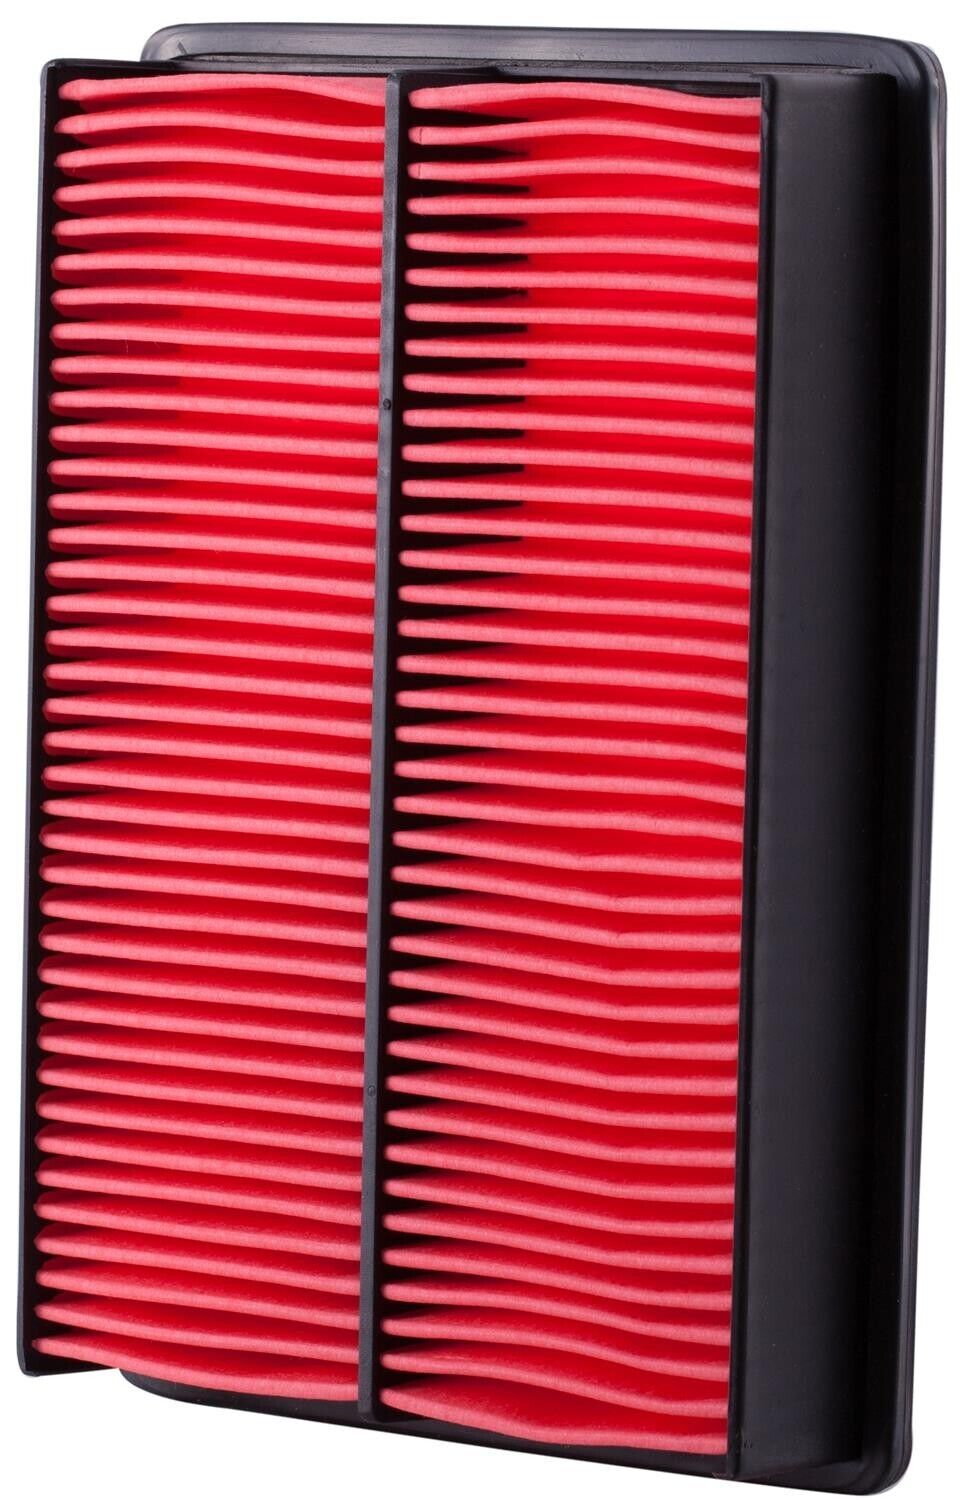 Pronto Air Filter for 1994-1997 Aspire PA5051